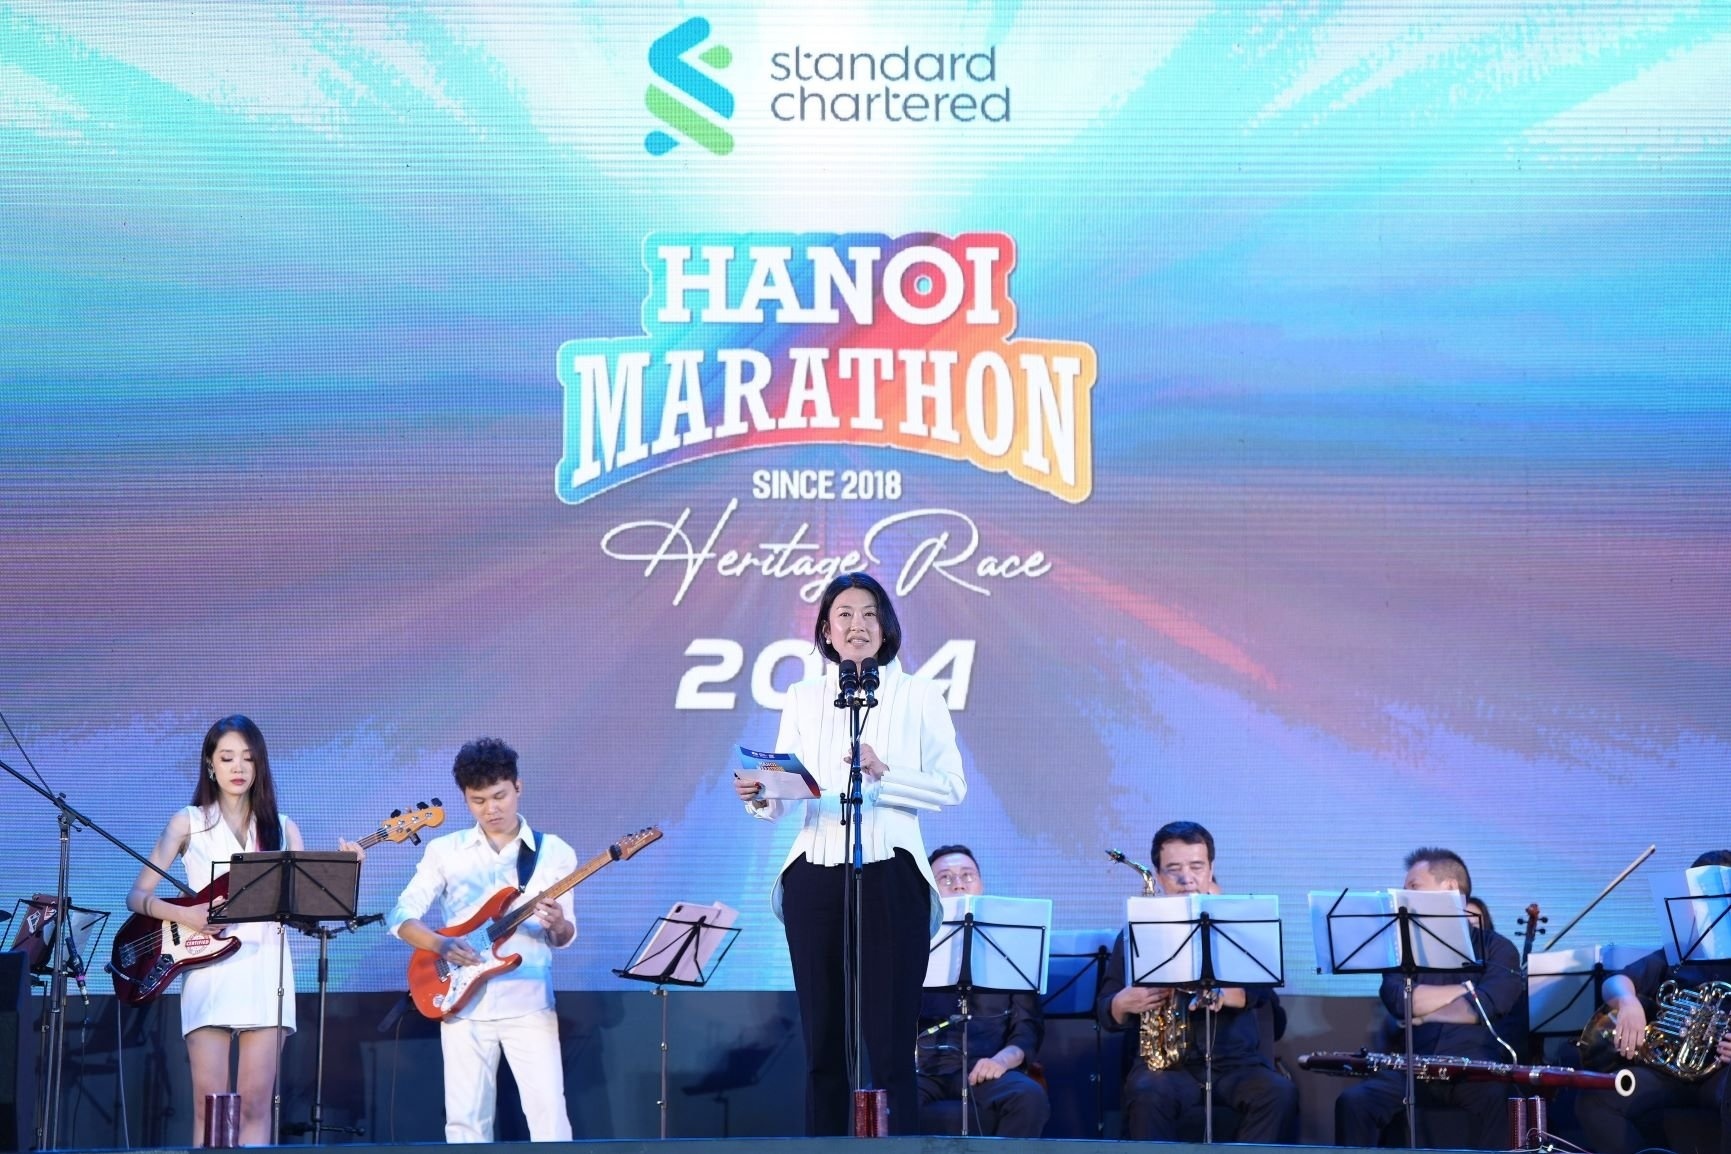 Standard Chartered brings its globally renowned marathon to Vietnam